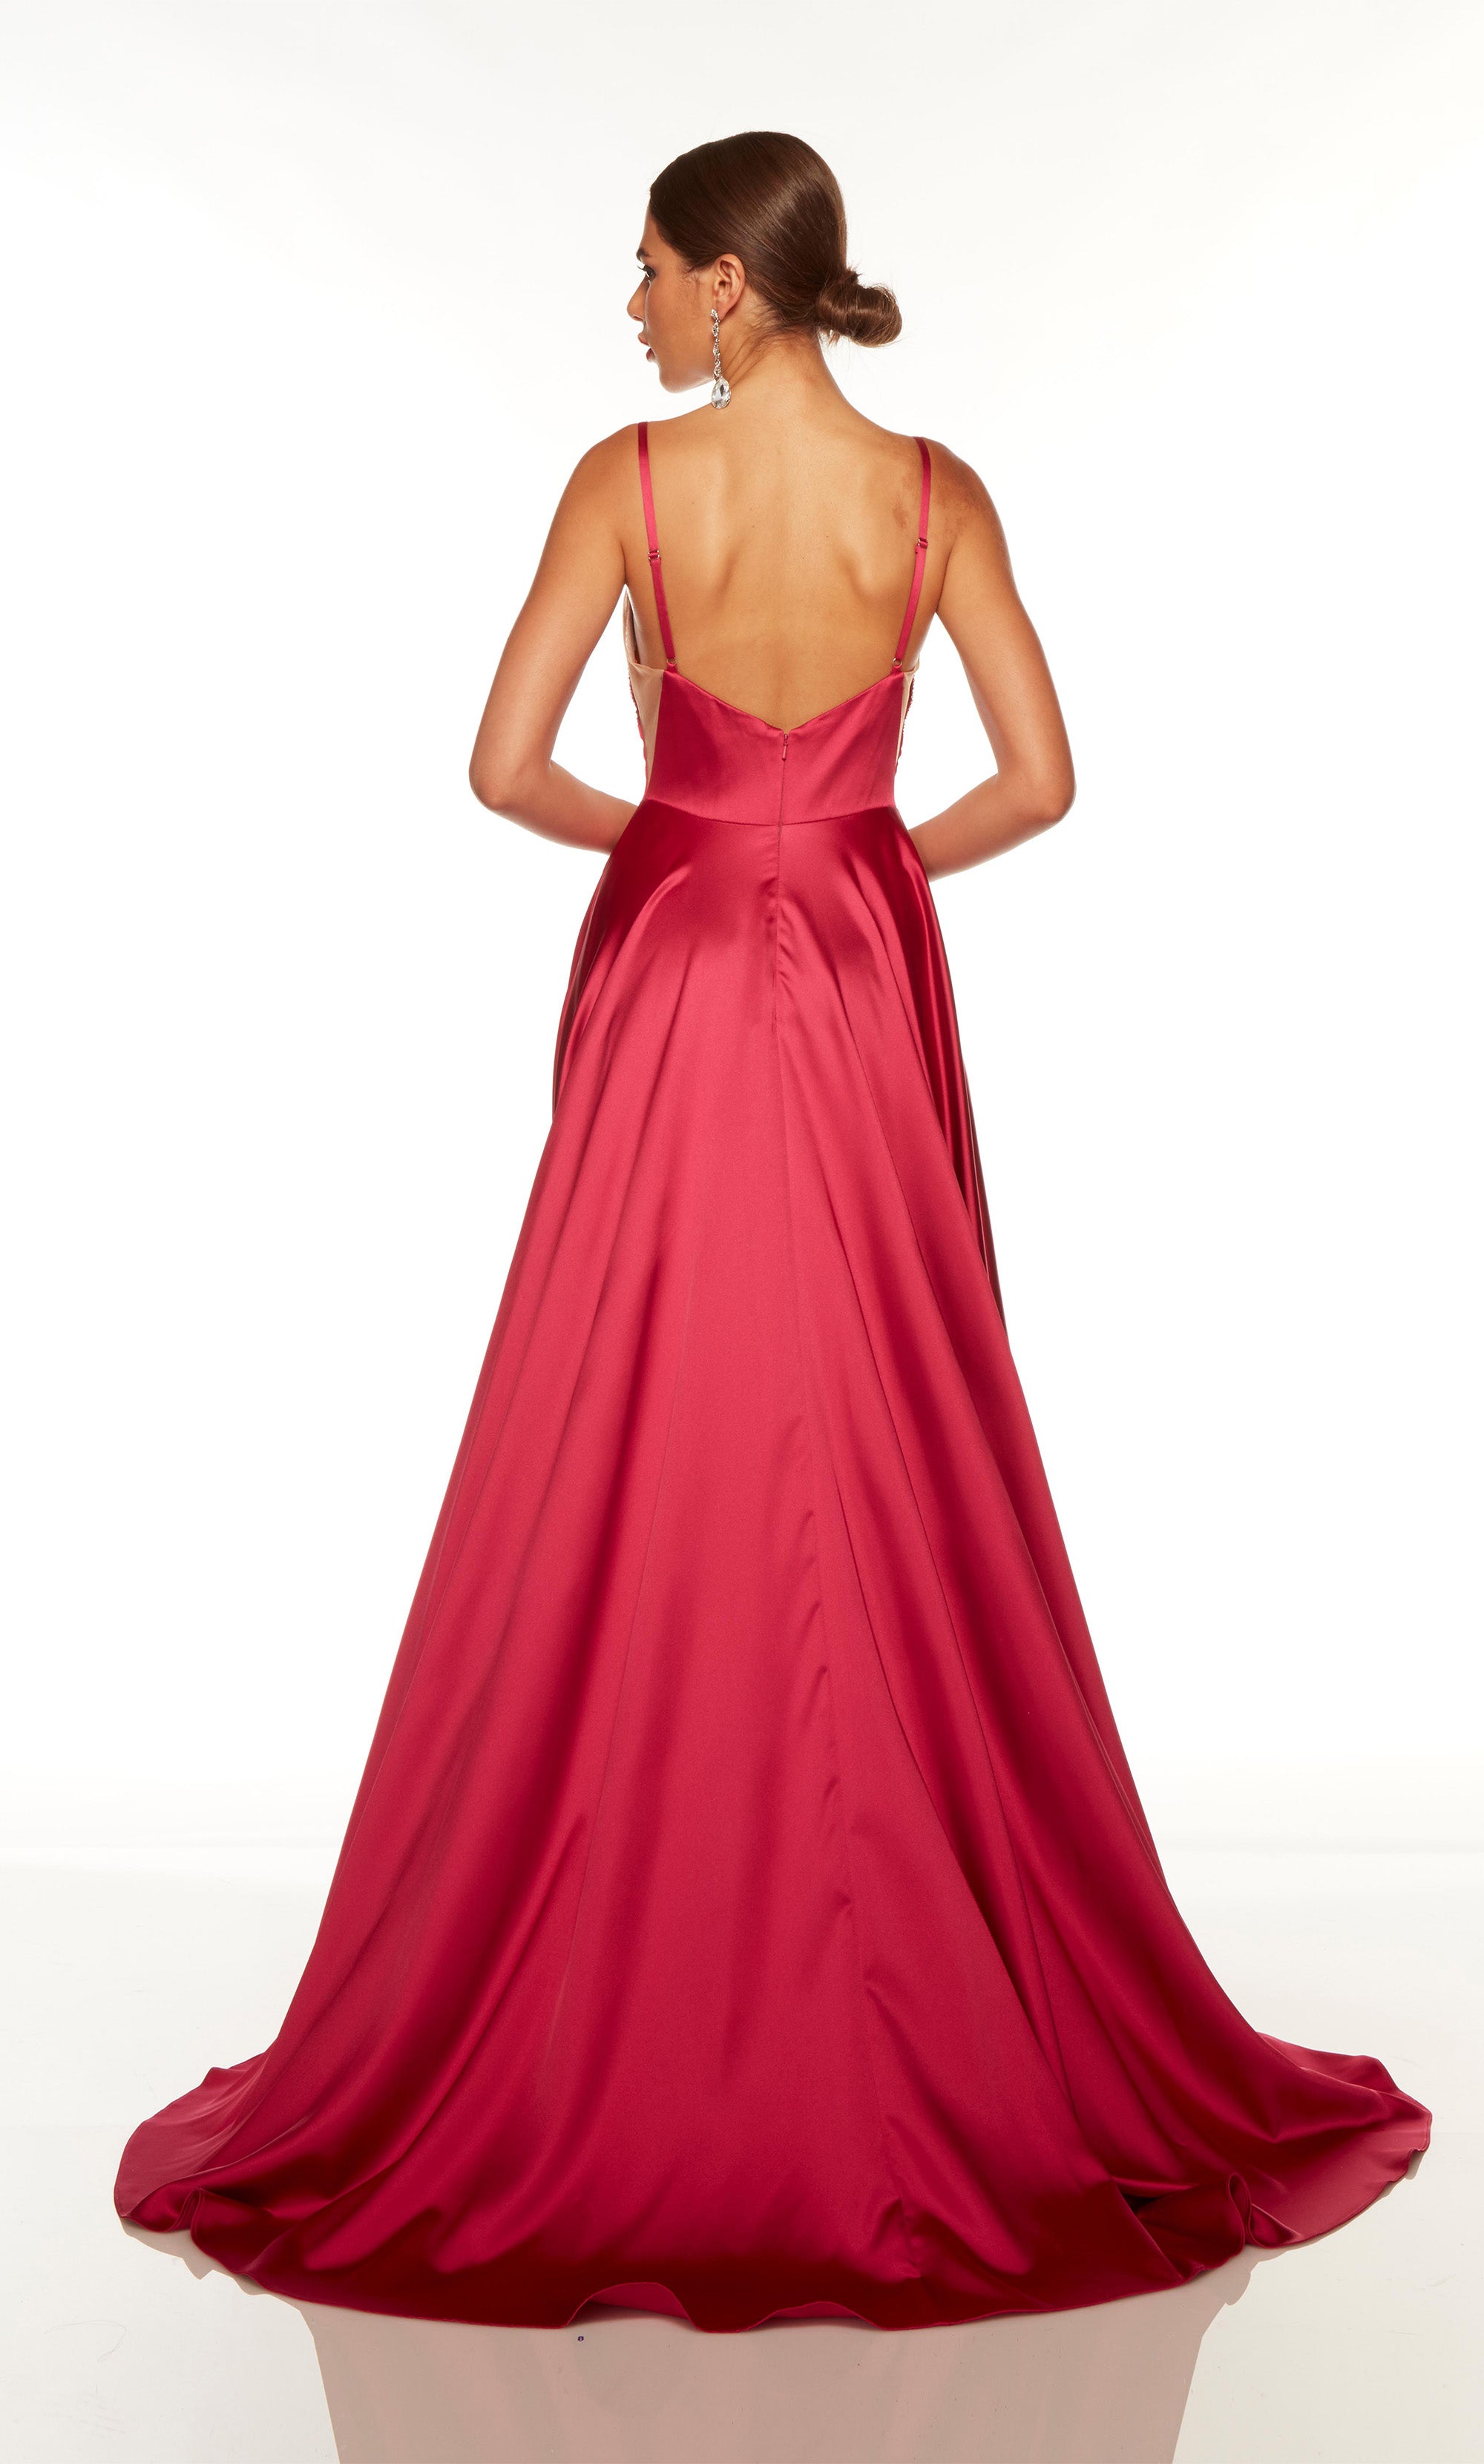 Fuchsia prom dress with a V neckline, embellished upper bodice, and side slit. COLOR-SWATCH_1746__FUCHSIA